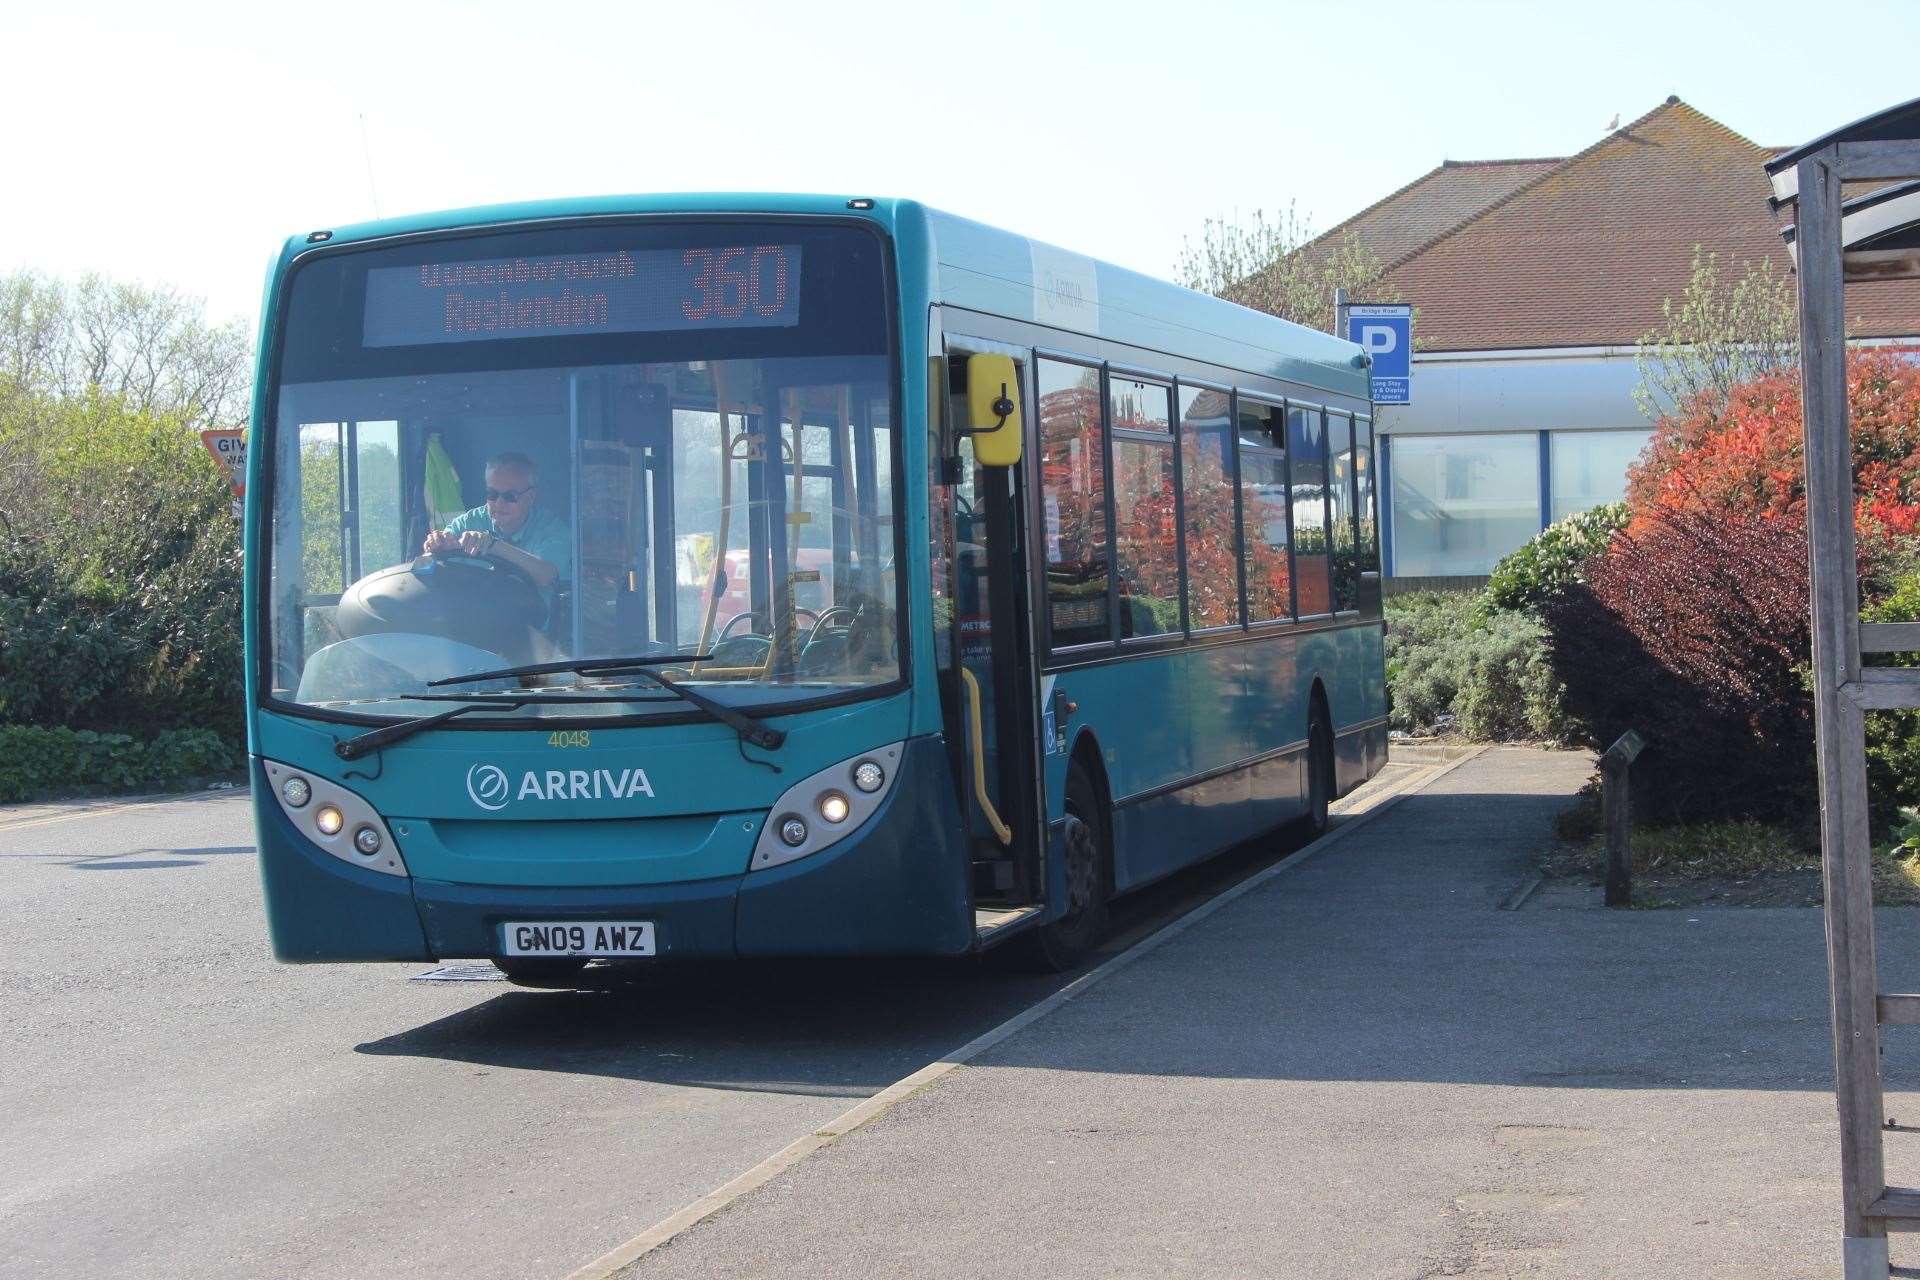 Arriva bus routes are being revised following the governments guidelines regarding the coronavirus